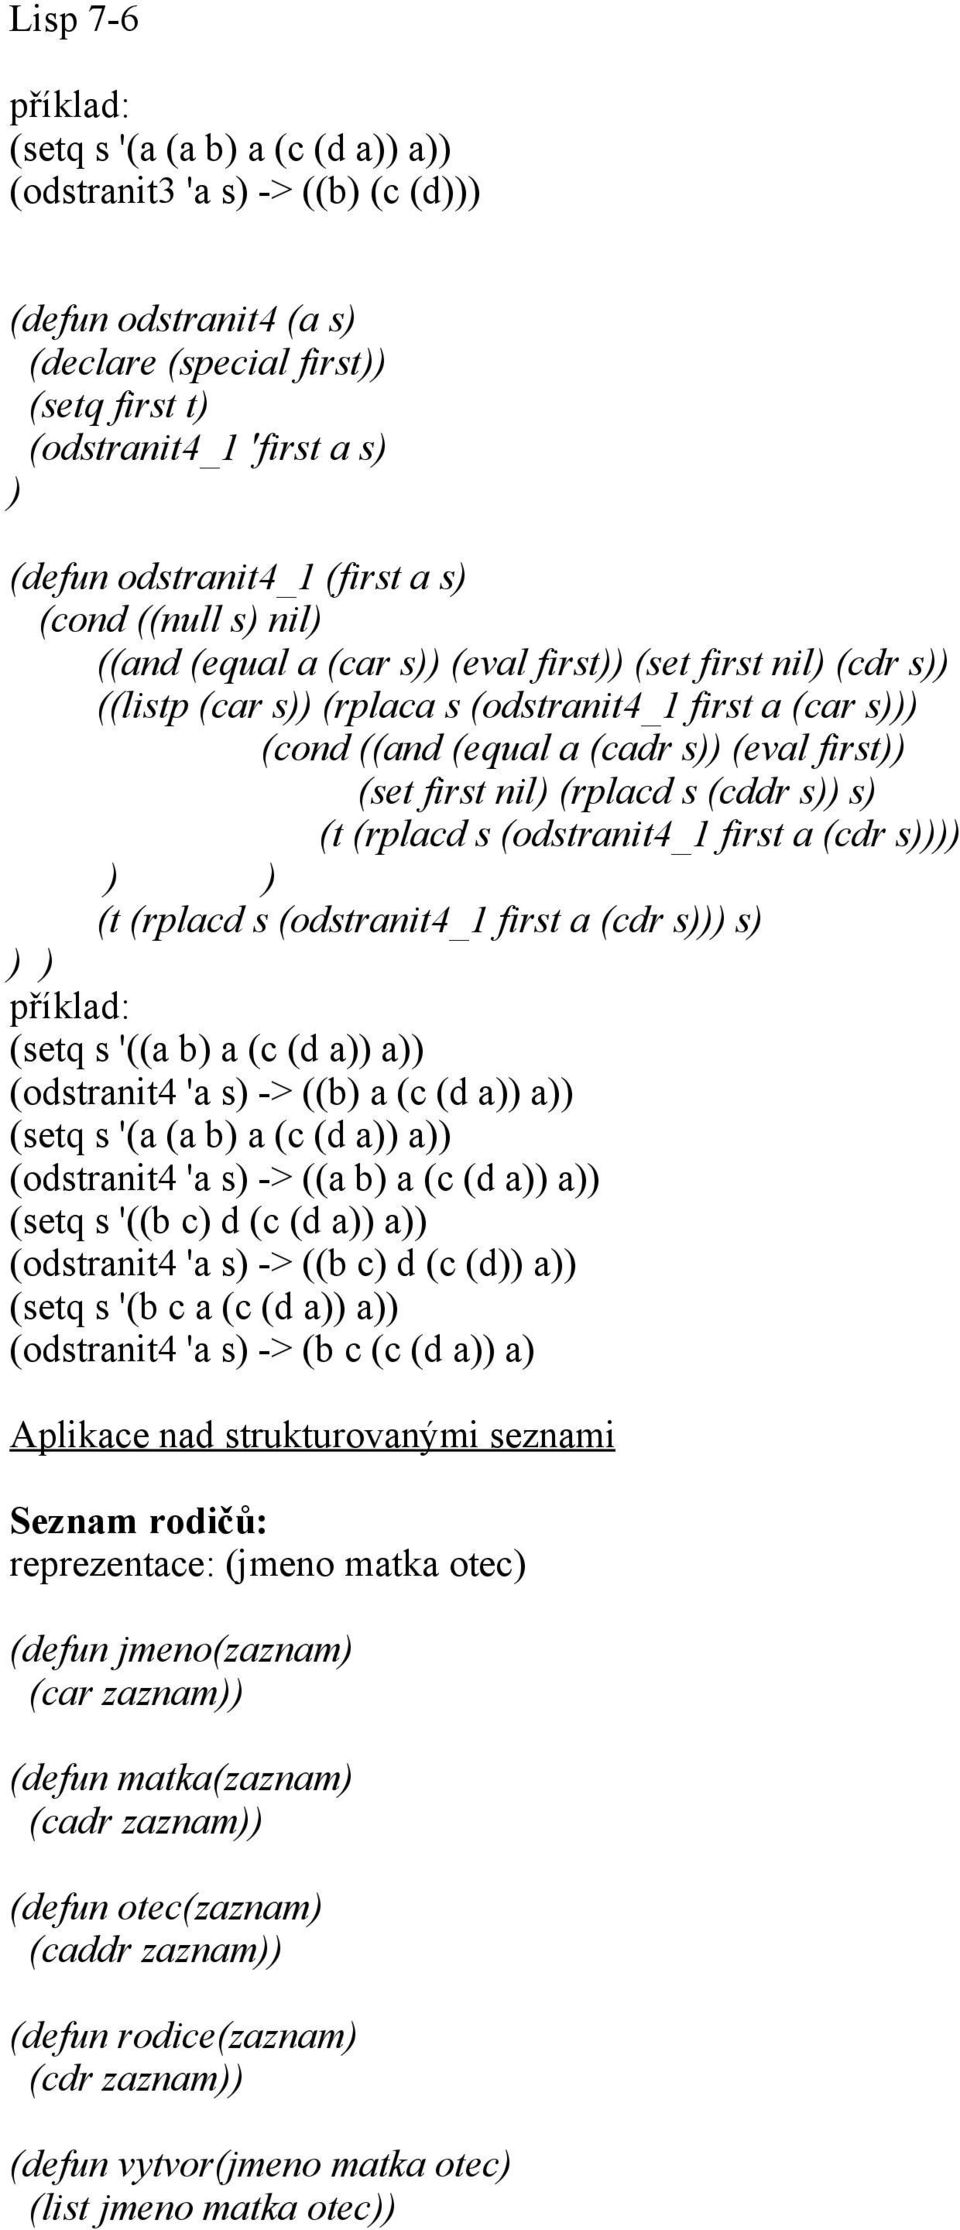 first a (cdr s (t (rplacd s (odstranit4_1 first a (cdr s s (setq s '((a b a (c (d a a (odstranit4 'a s -> ((b a (c (d a a (setq s '(a (a b a (c (d a a (odstranit4 'a s -> ((a b a (c (d a a (setq s